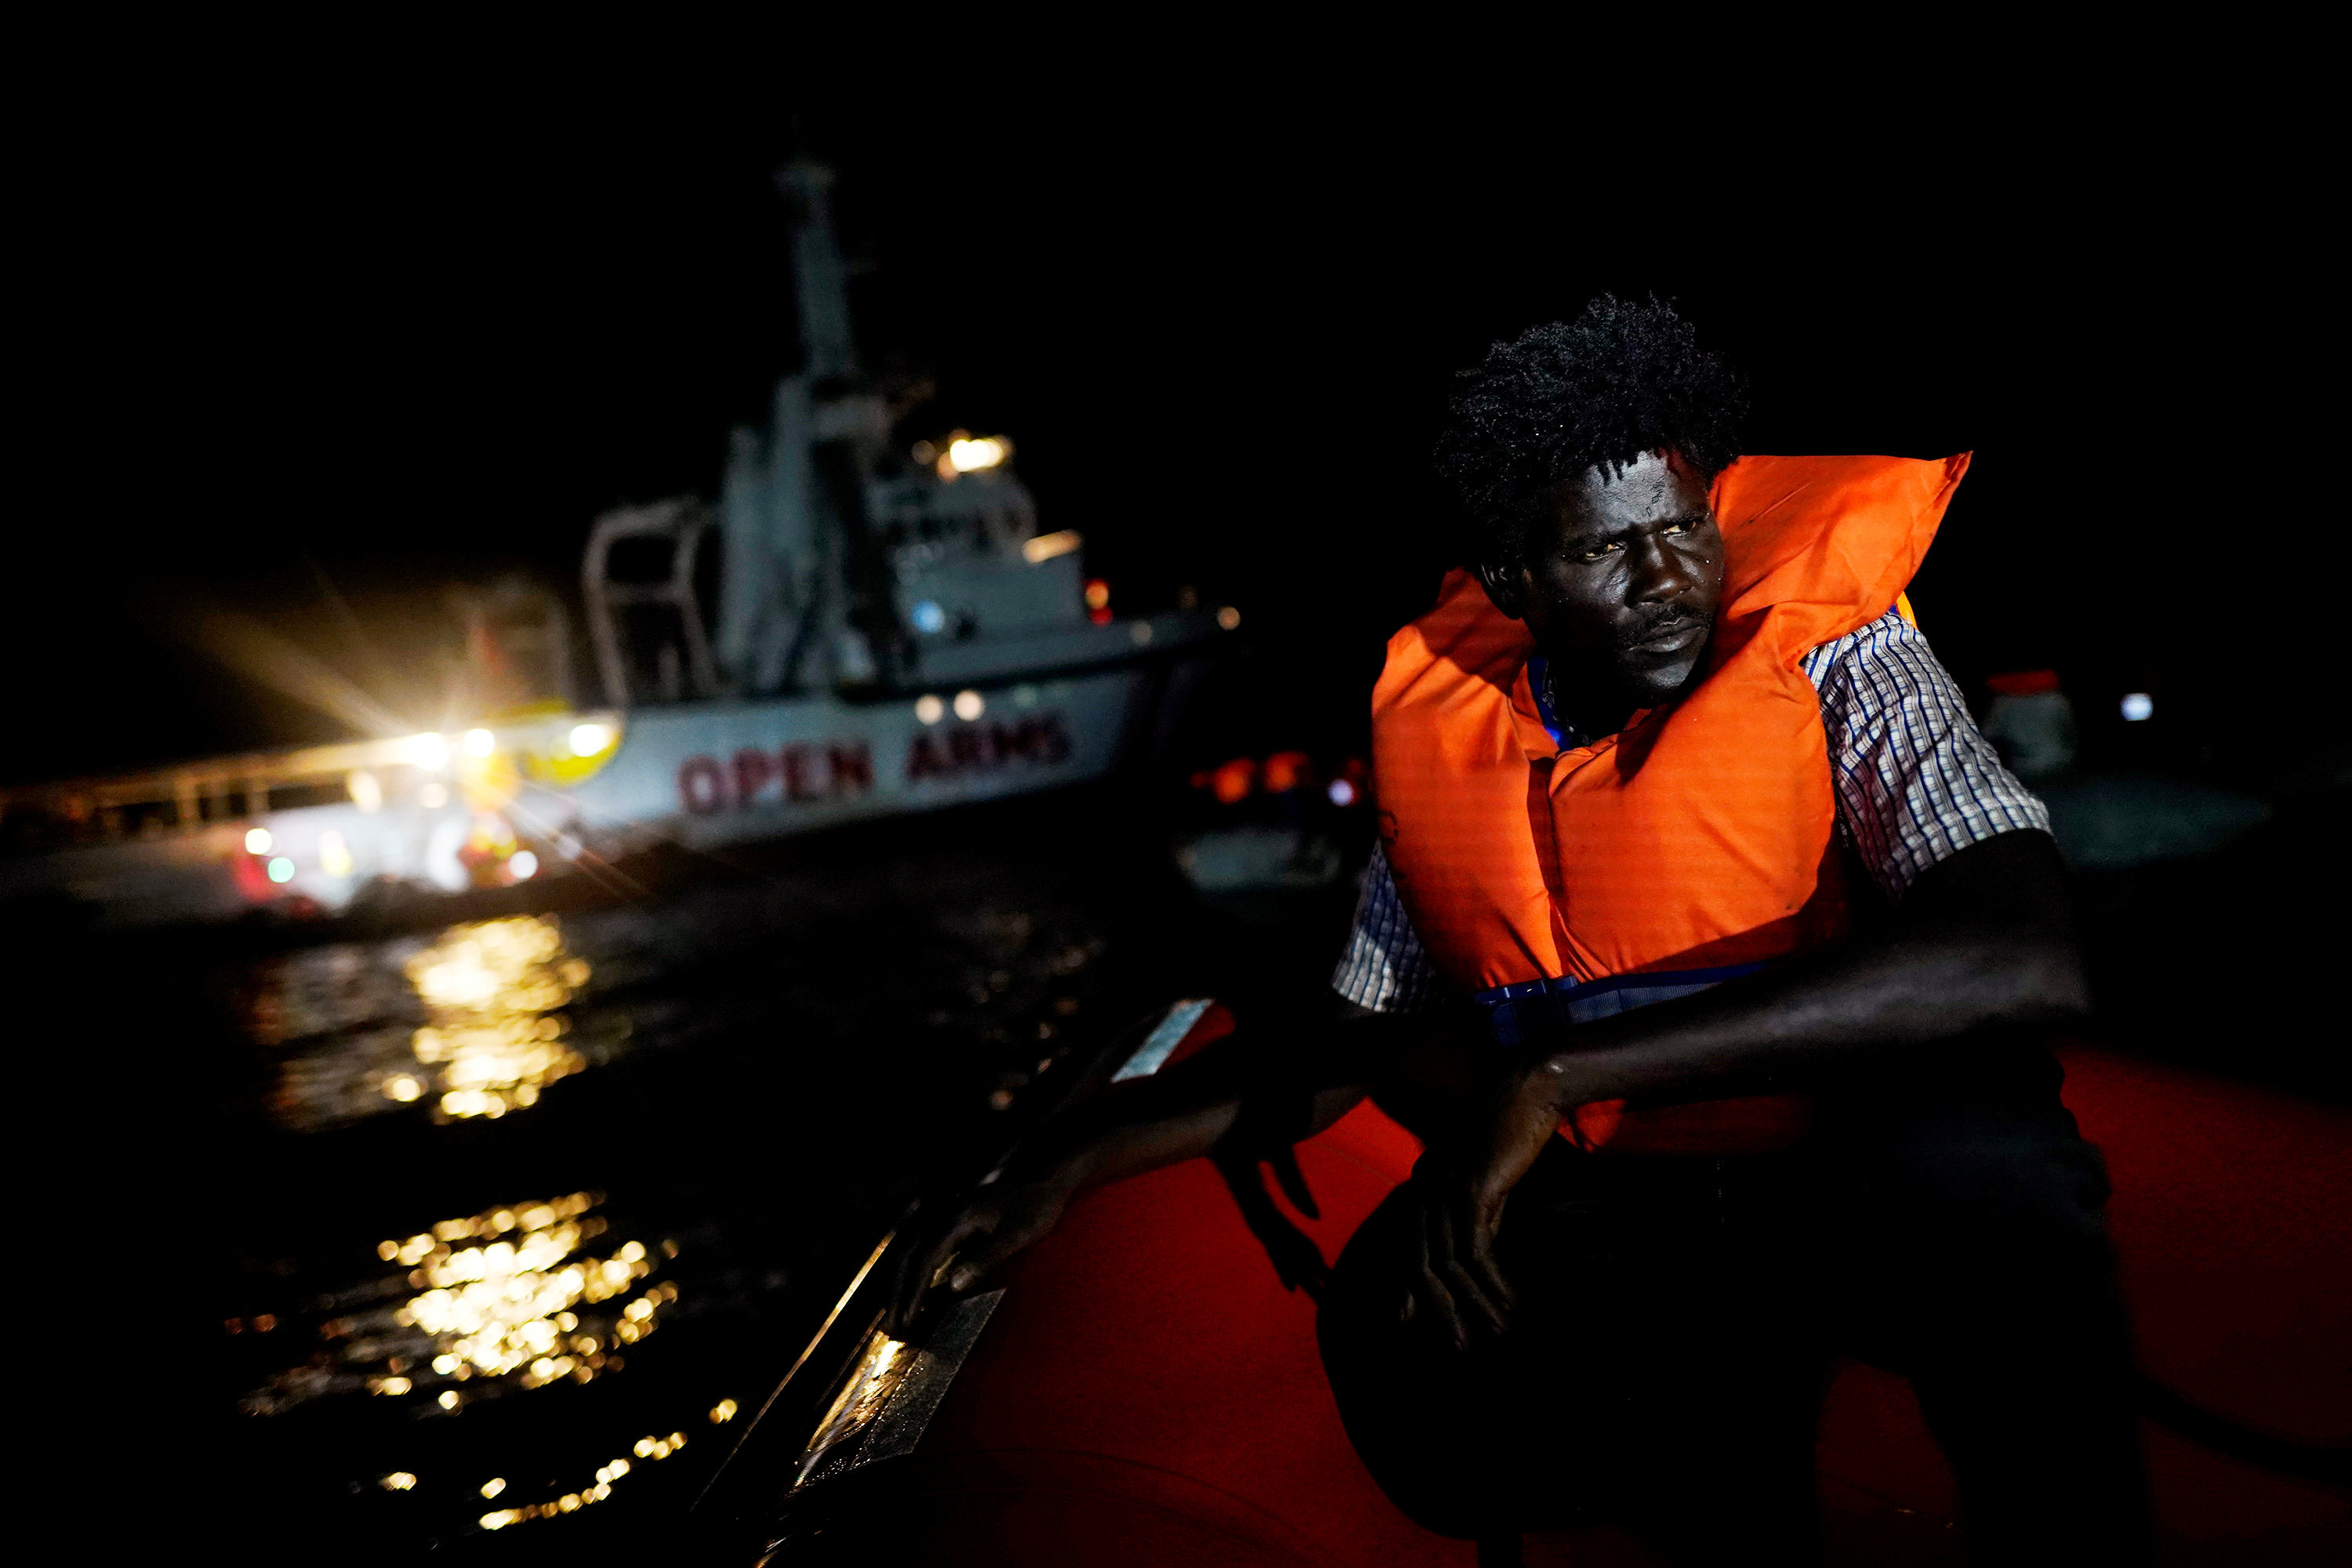 A Picture and its Story: Spanish rescue boat finds life and death off Libya coast ( REUTERS/Juan Medina)